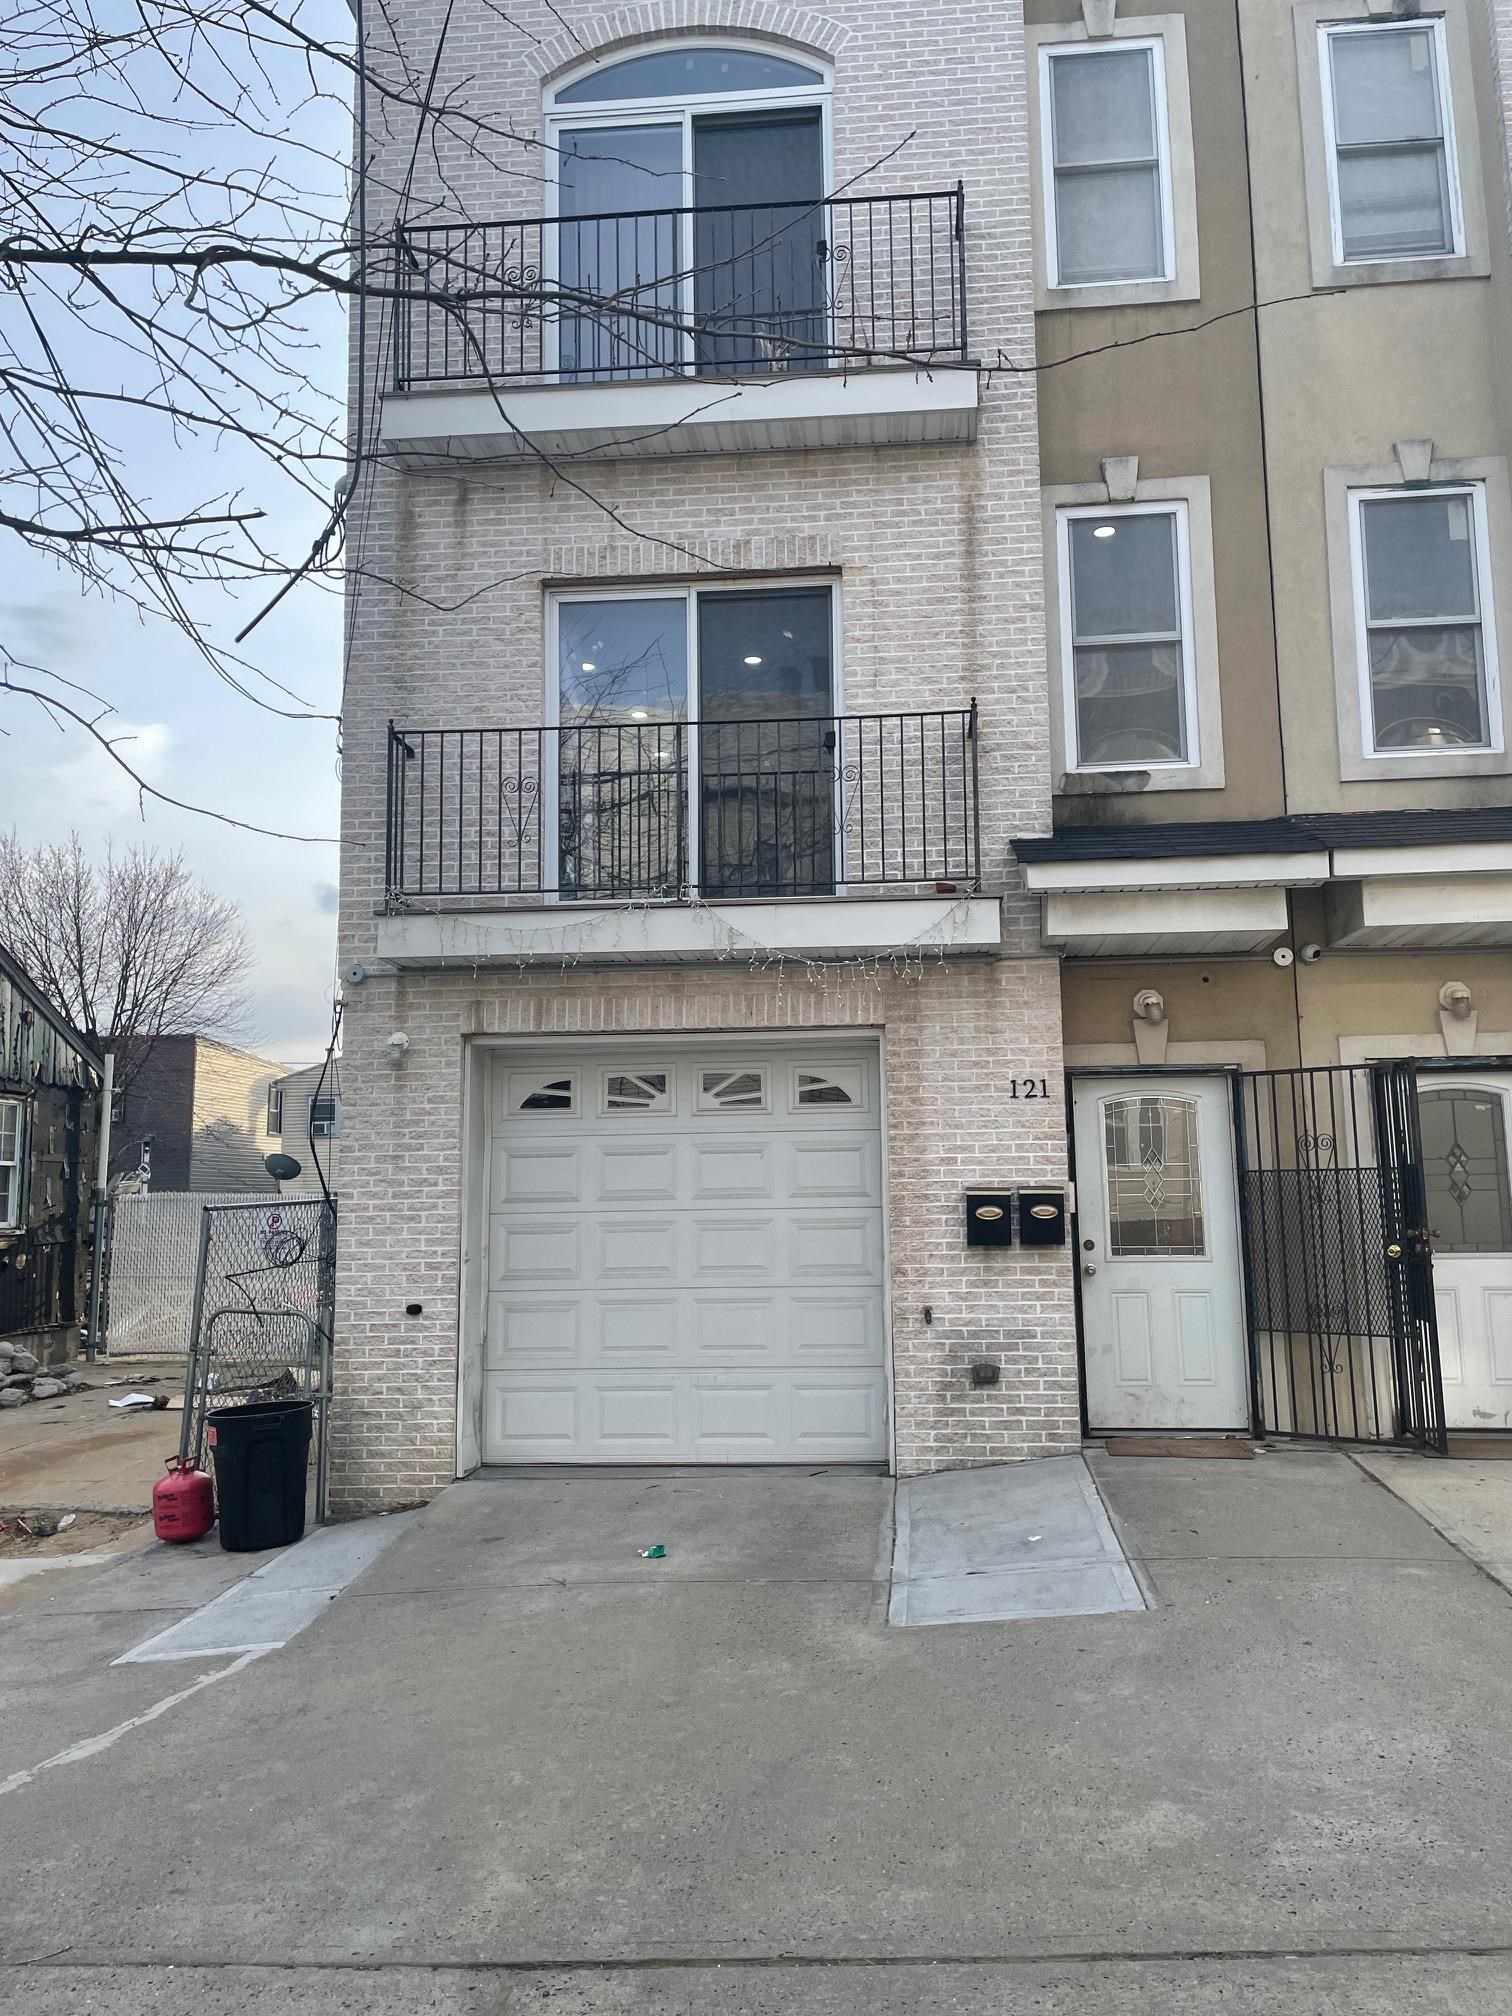 # 240005218 - For Rent in JERSEY CITY - Greenville NJ